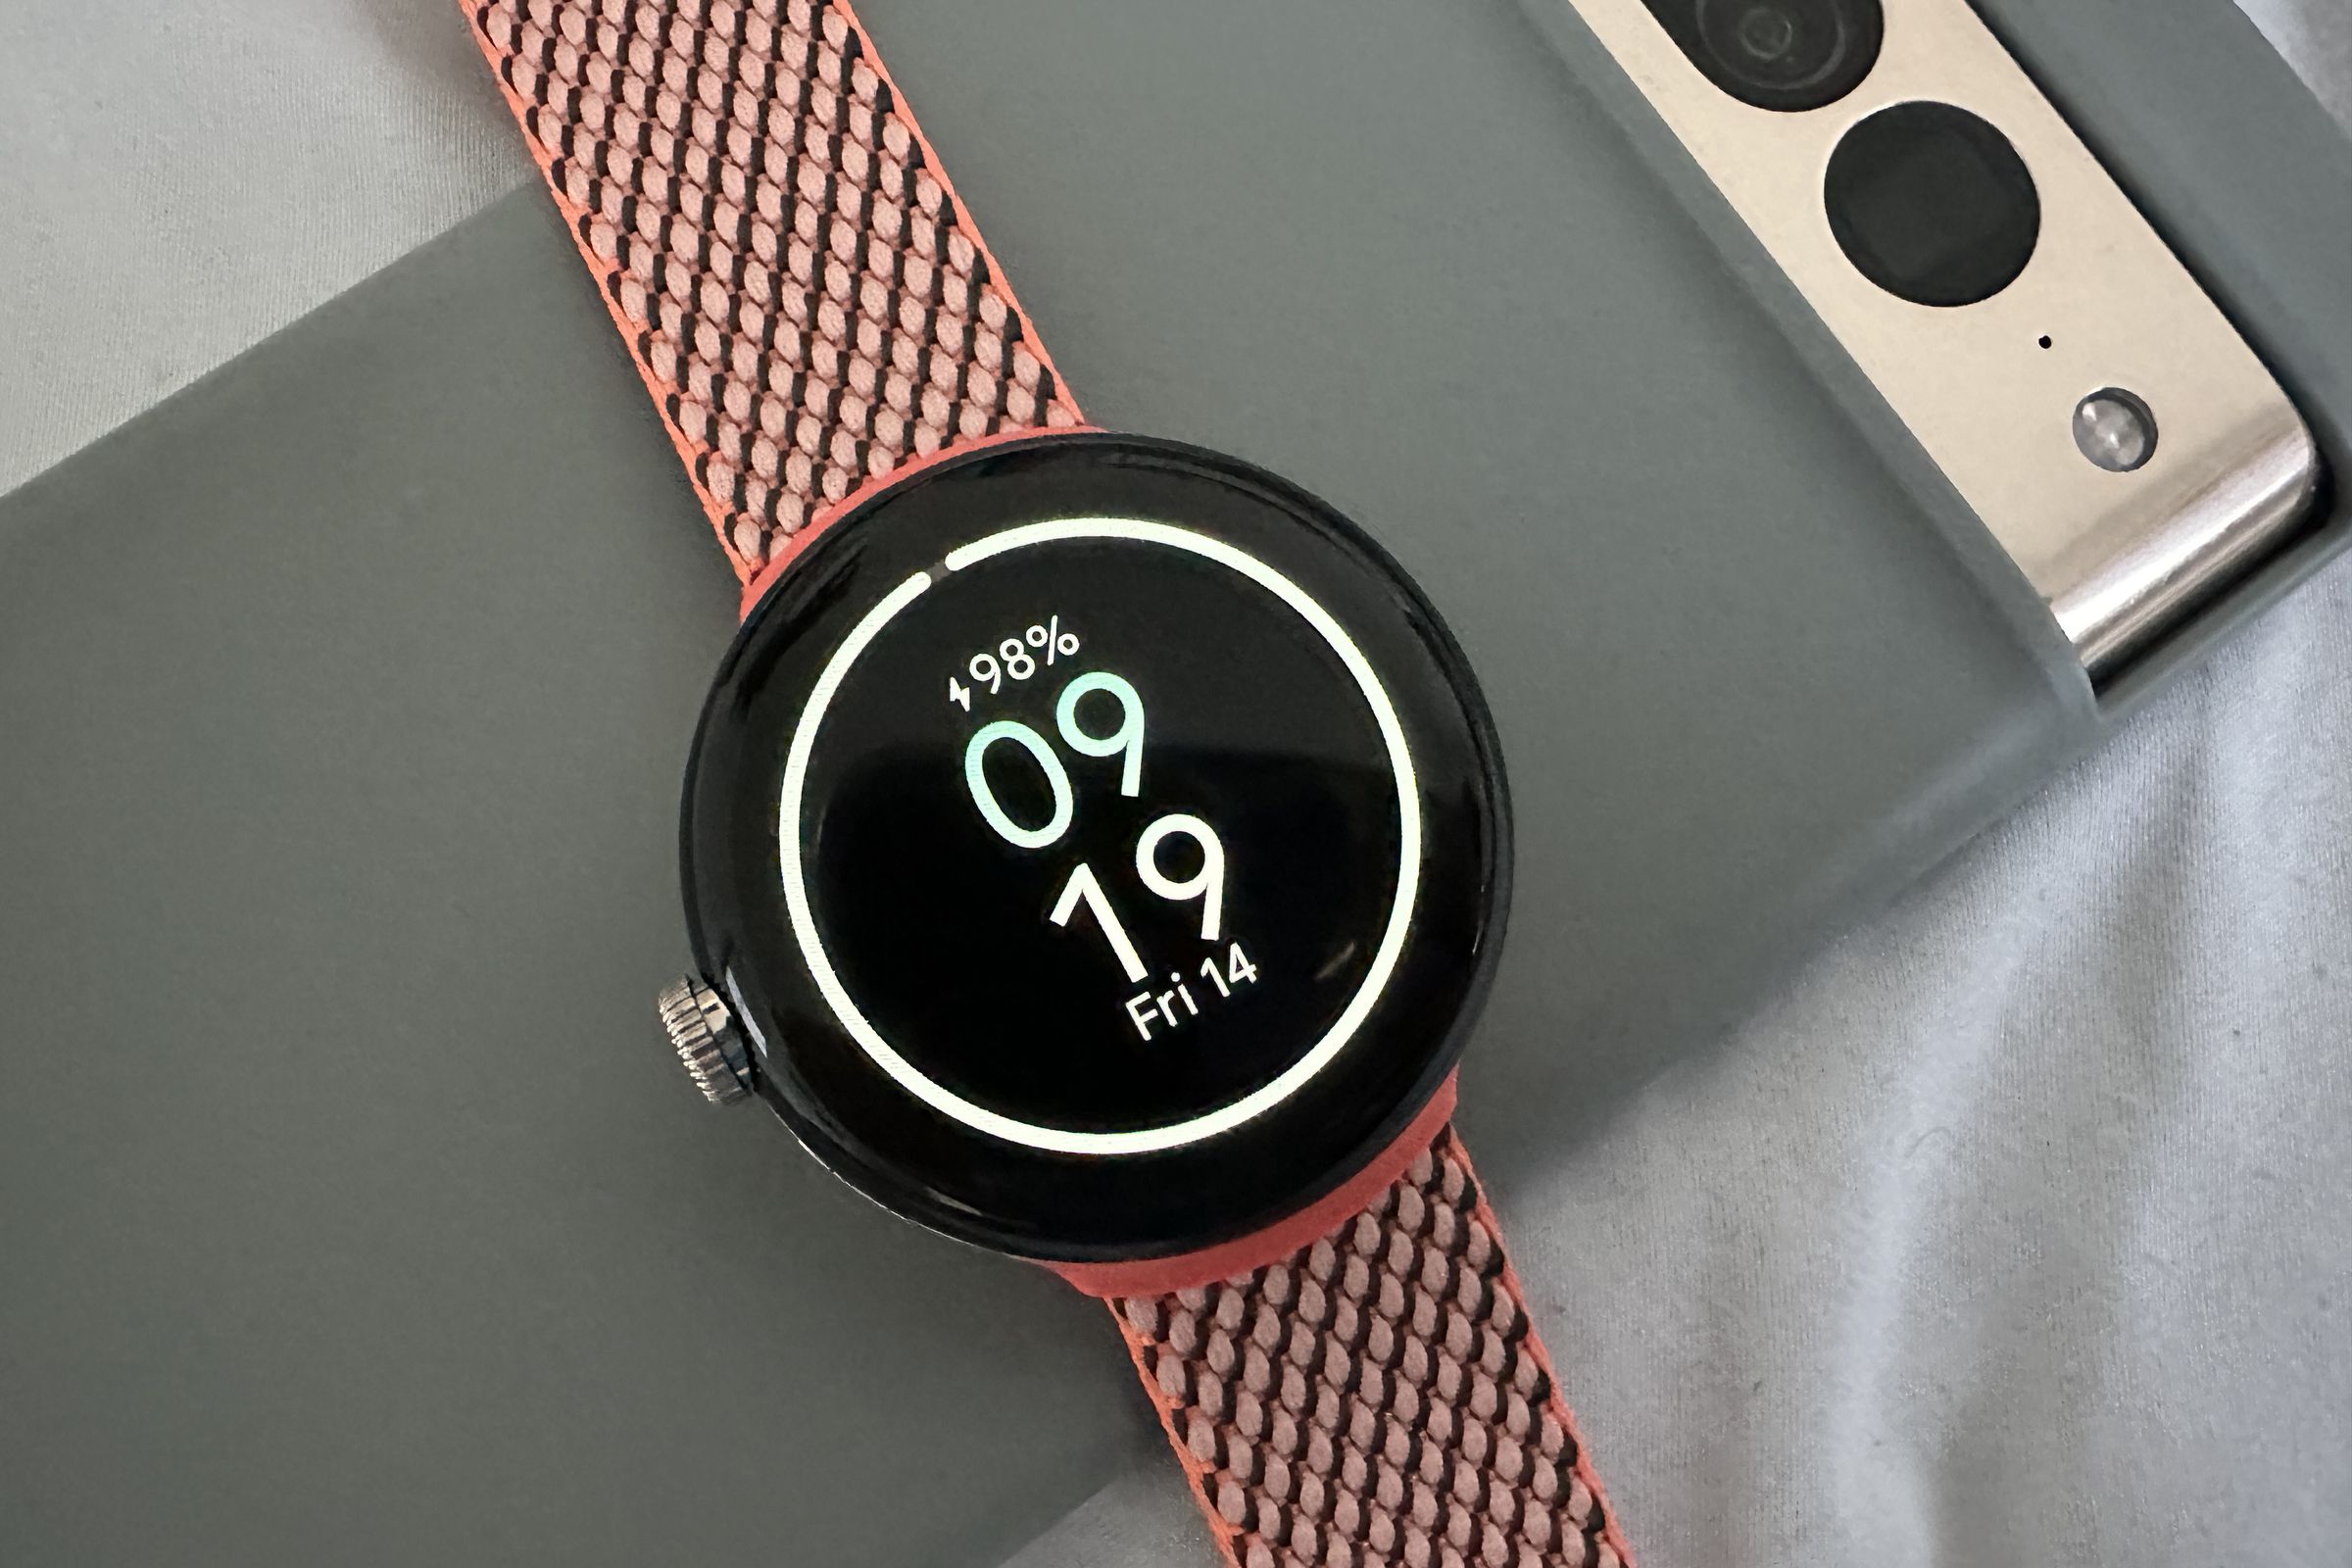 The Huawei Watch GT 2 Pro will support 10 W wireless charging for